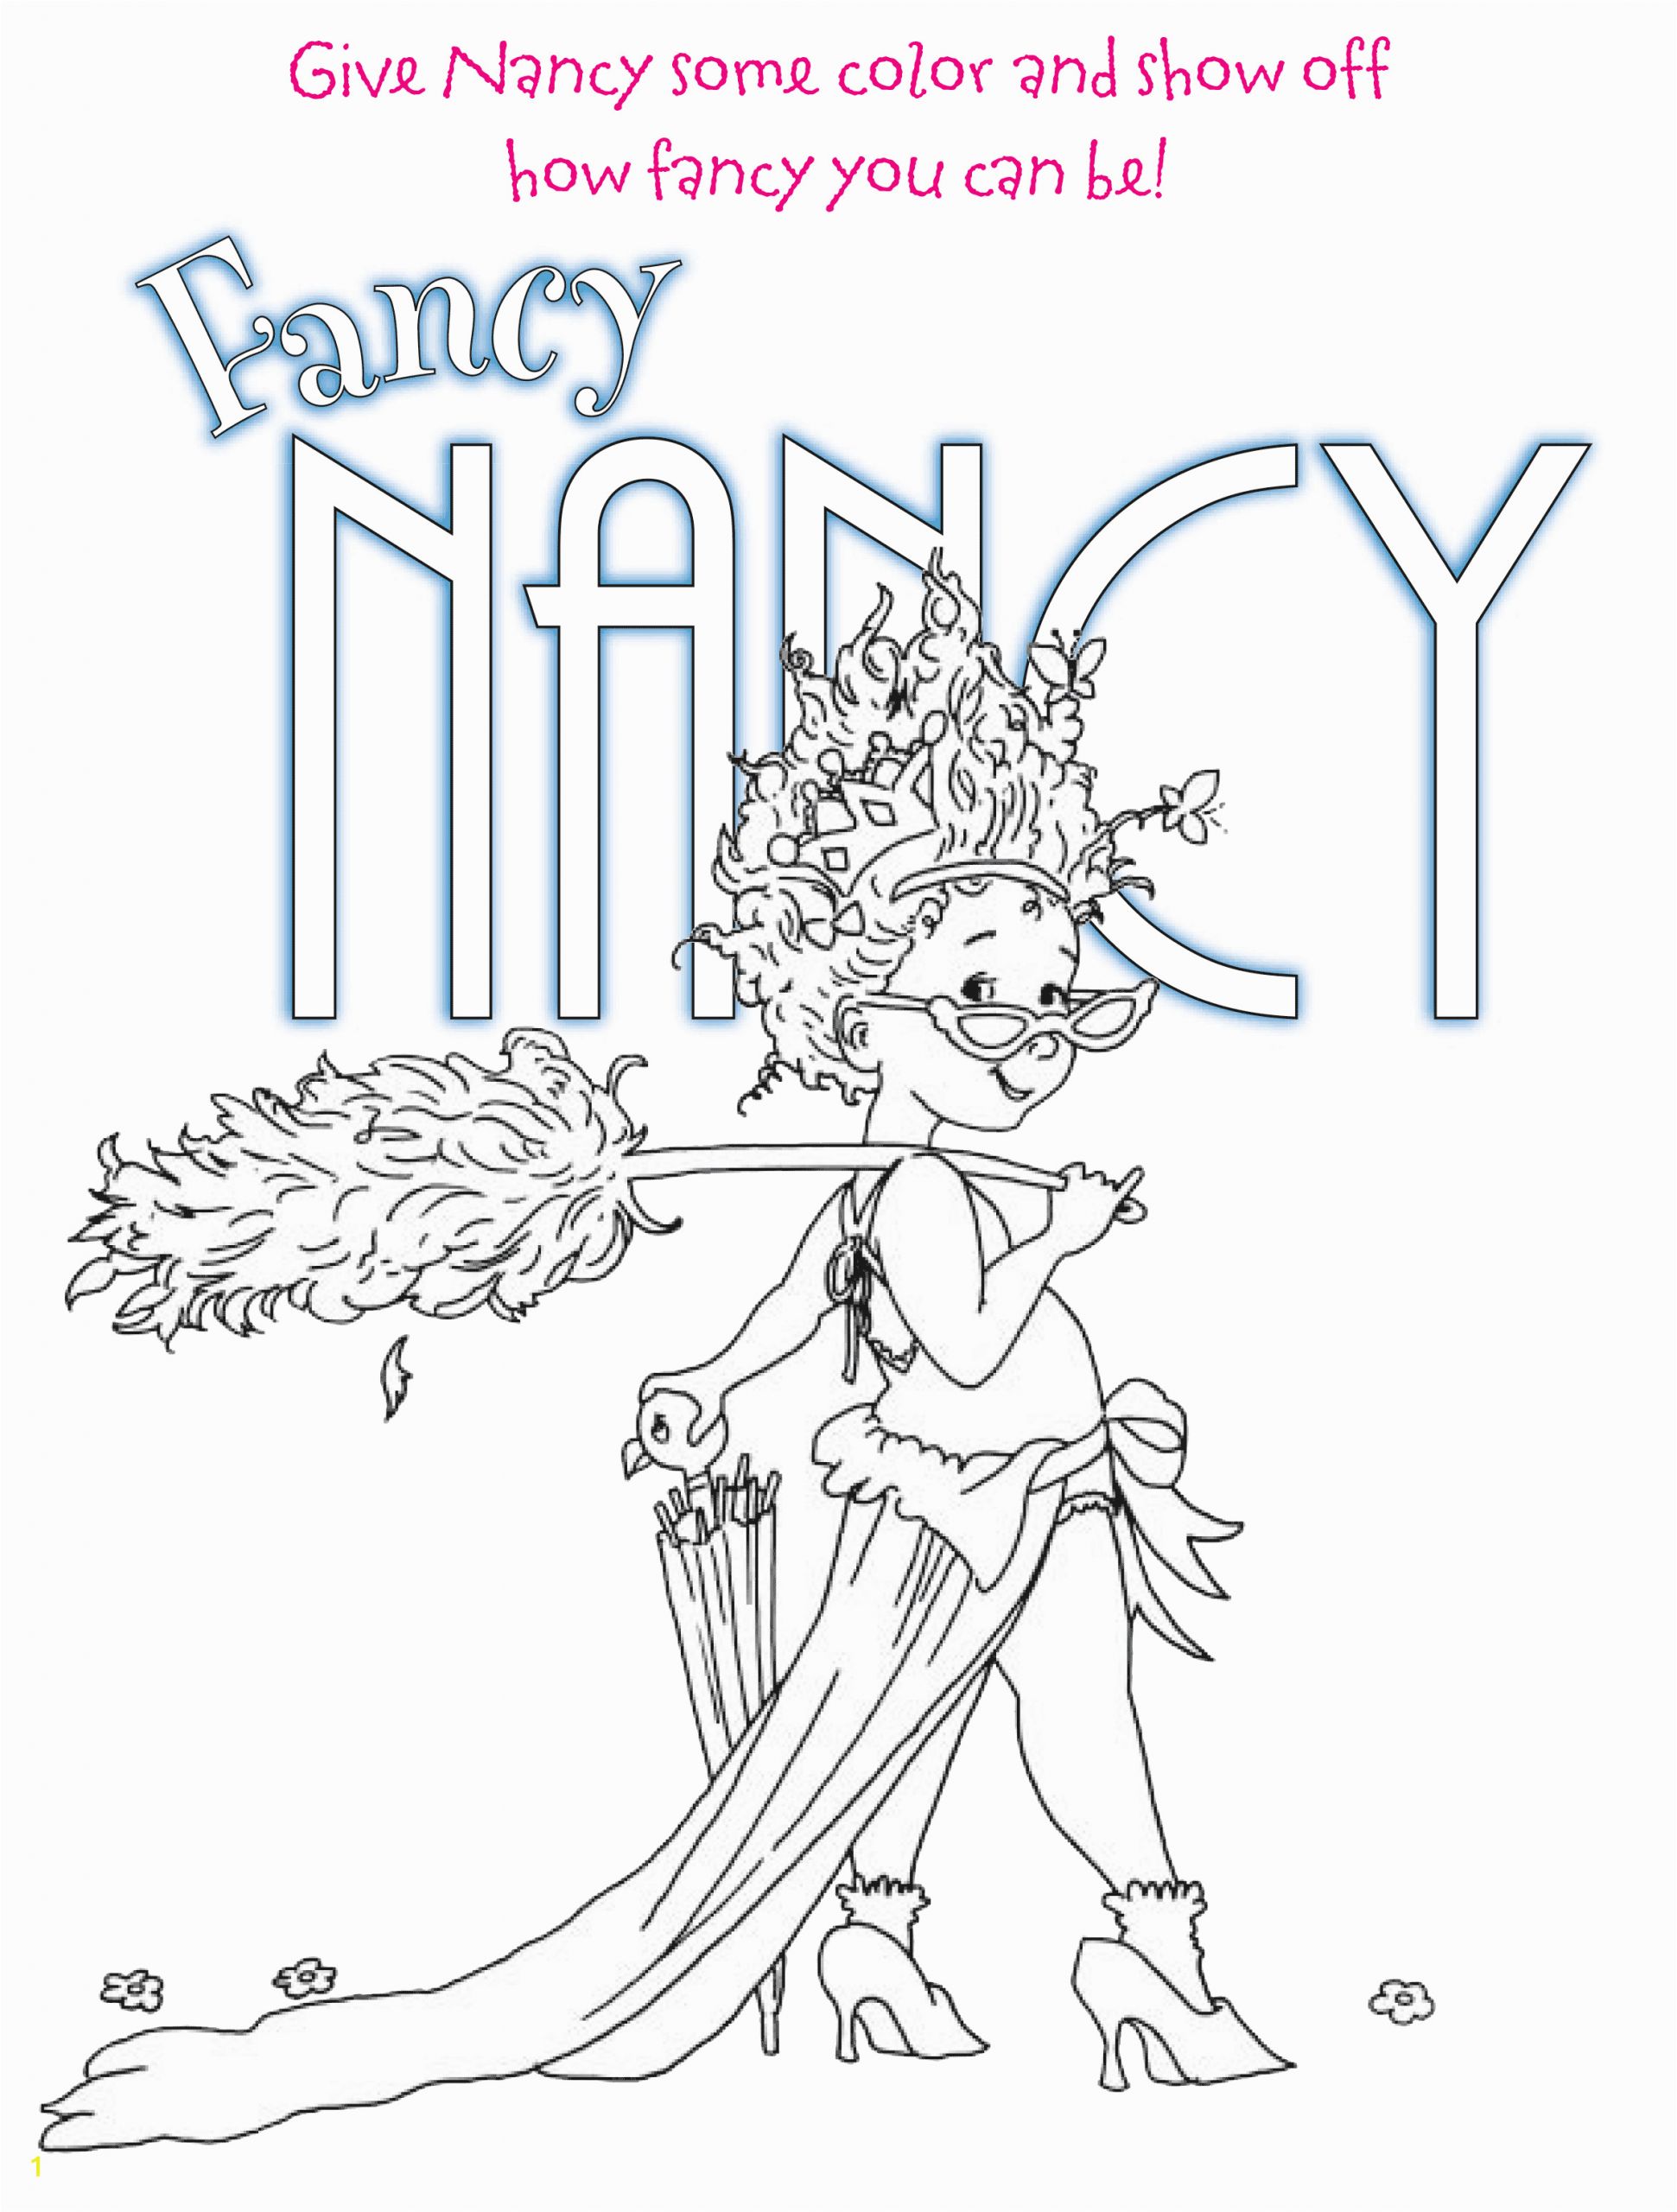 Fancy Nancy Coloring Pages to Print Fancy Nancy Tea Party Coloring Pages Coloring Home